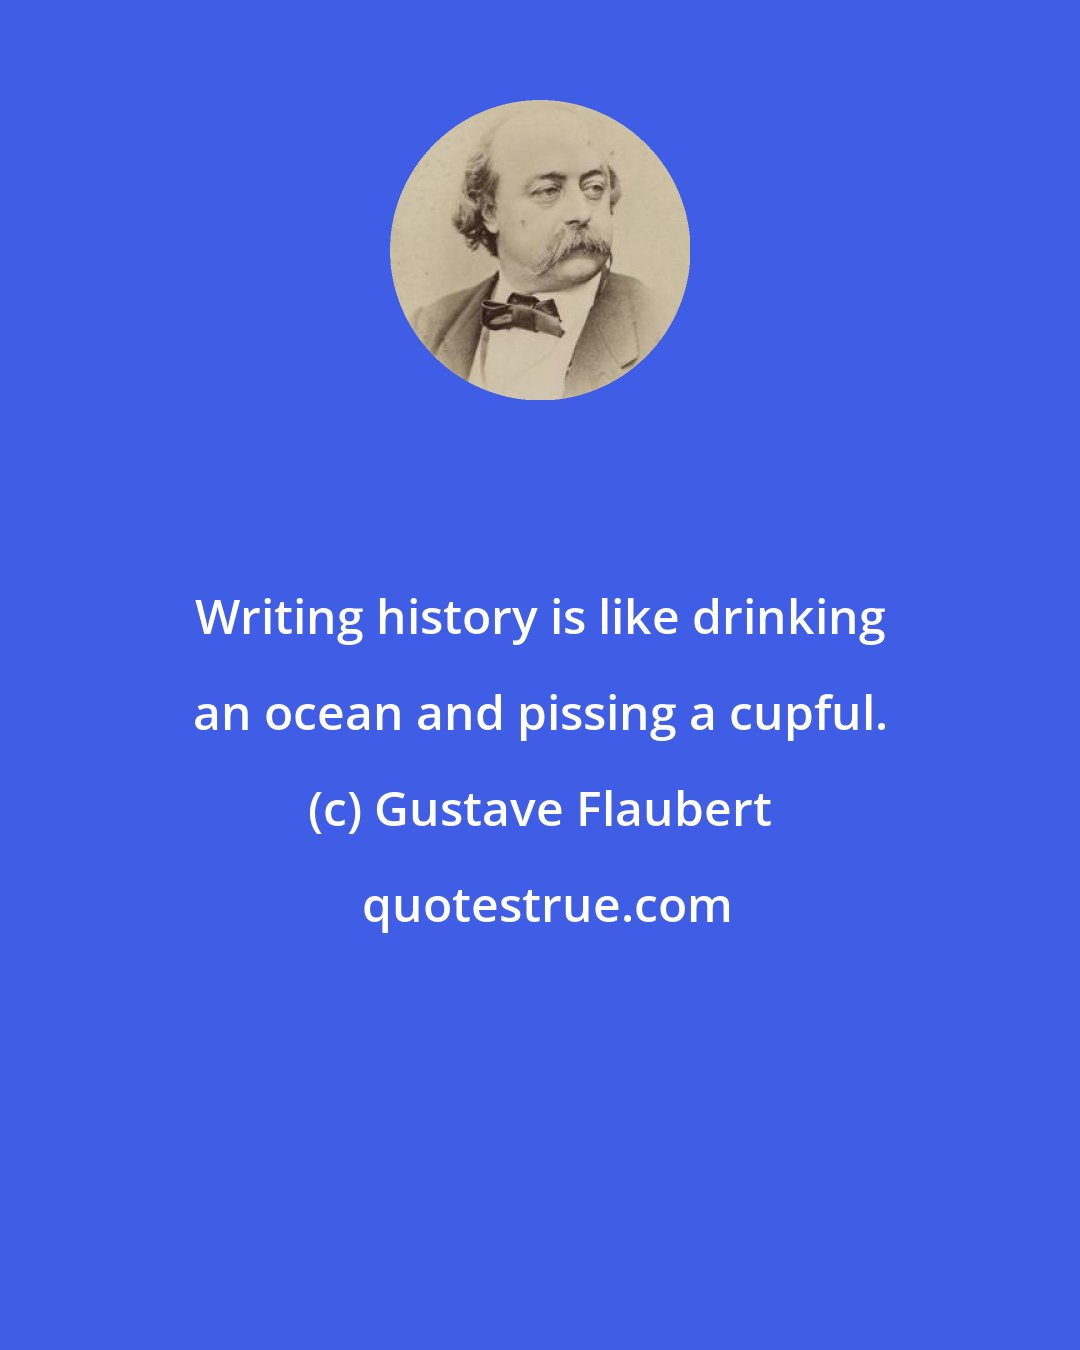 Gustave Flaubert: Writing history is like drinking an ocean and pissing a cupful.